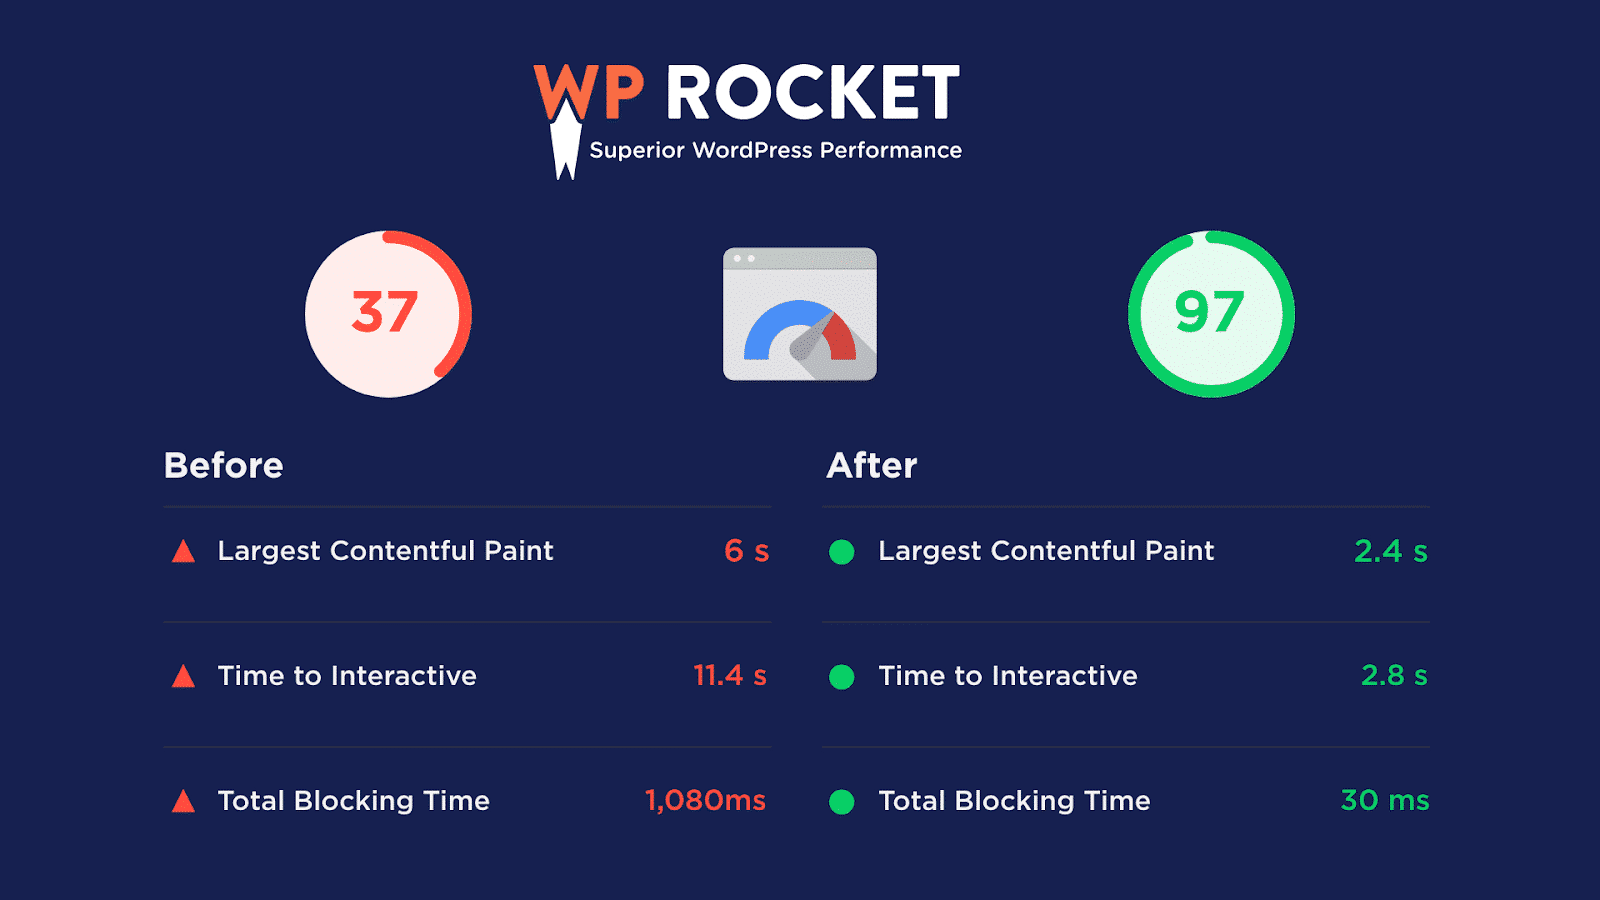 WP Rocket results - Before and after